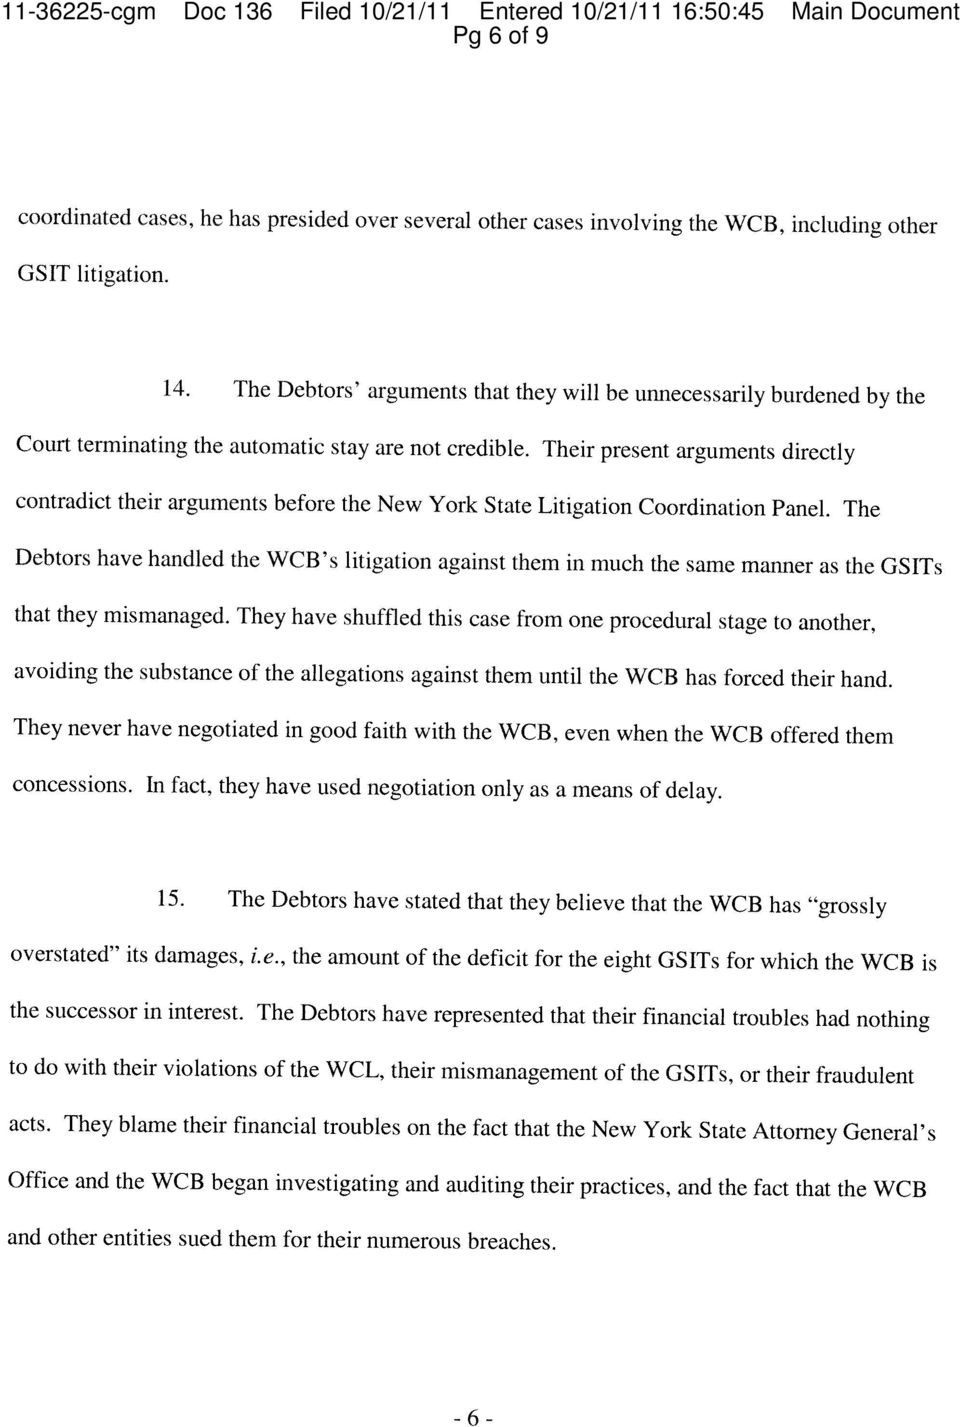 in interest. The Debtors have represented that their financial troubles had nothing overstated its damages, i.e., the amount of the deficit for the eight GSITs for which the WCB is 15.